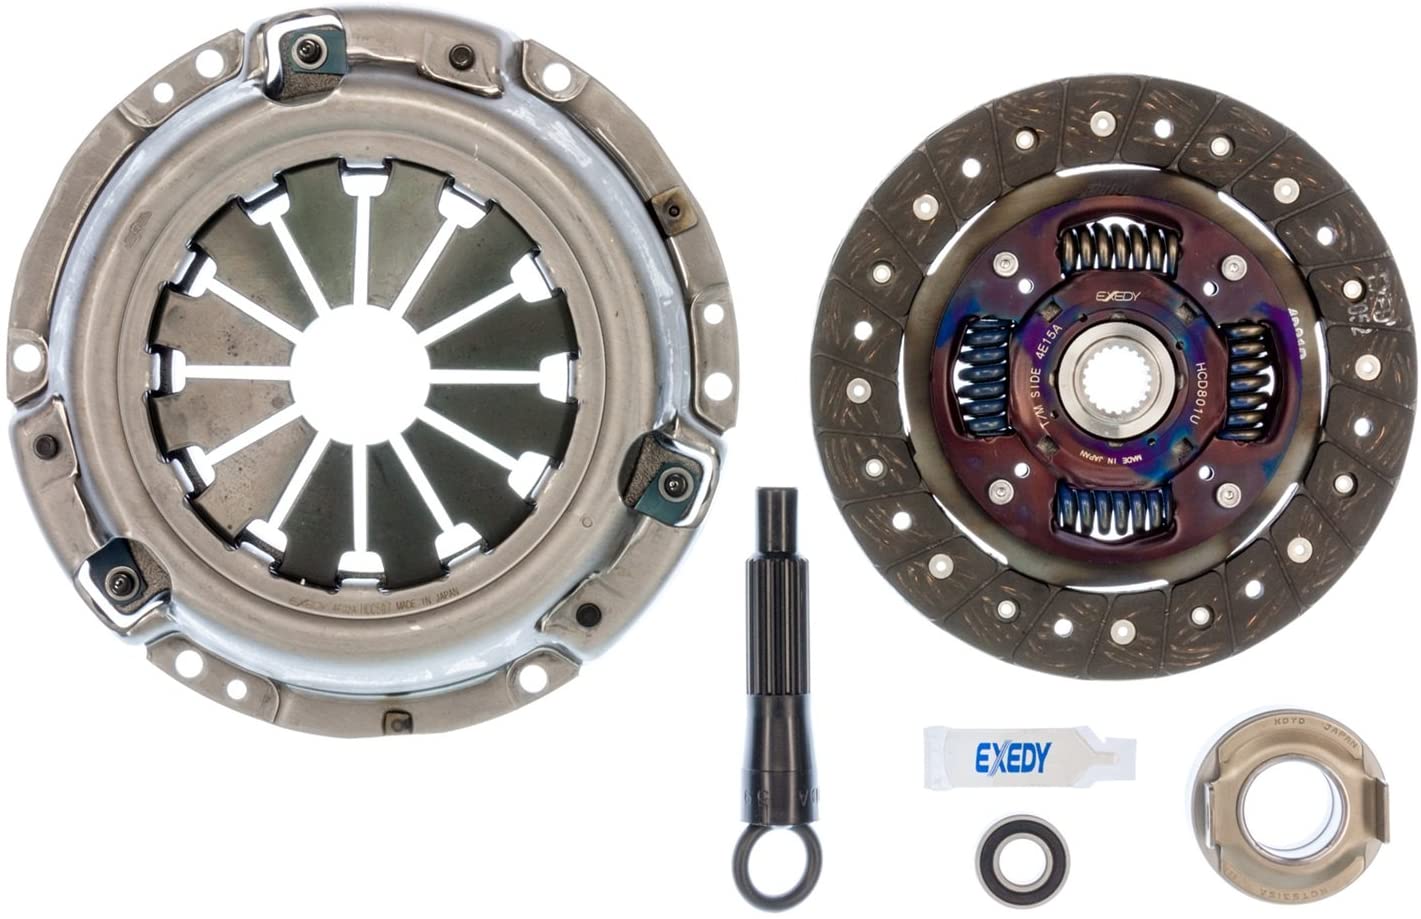 EXEDY 08011 OEM Replacement Clutch Kit